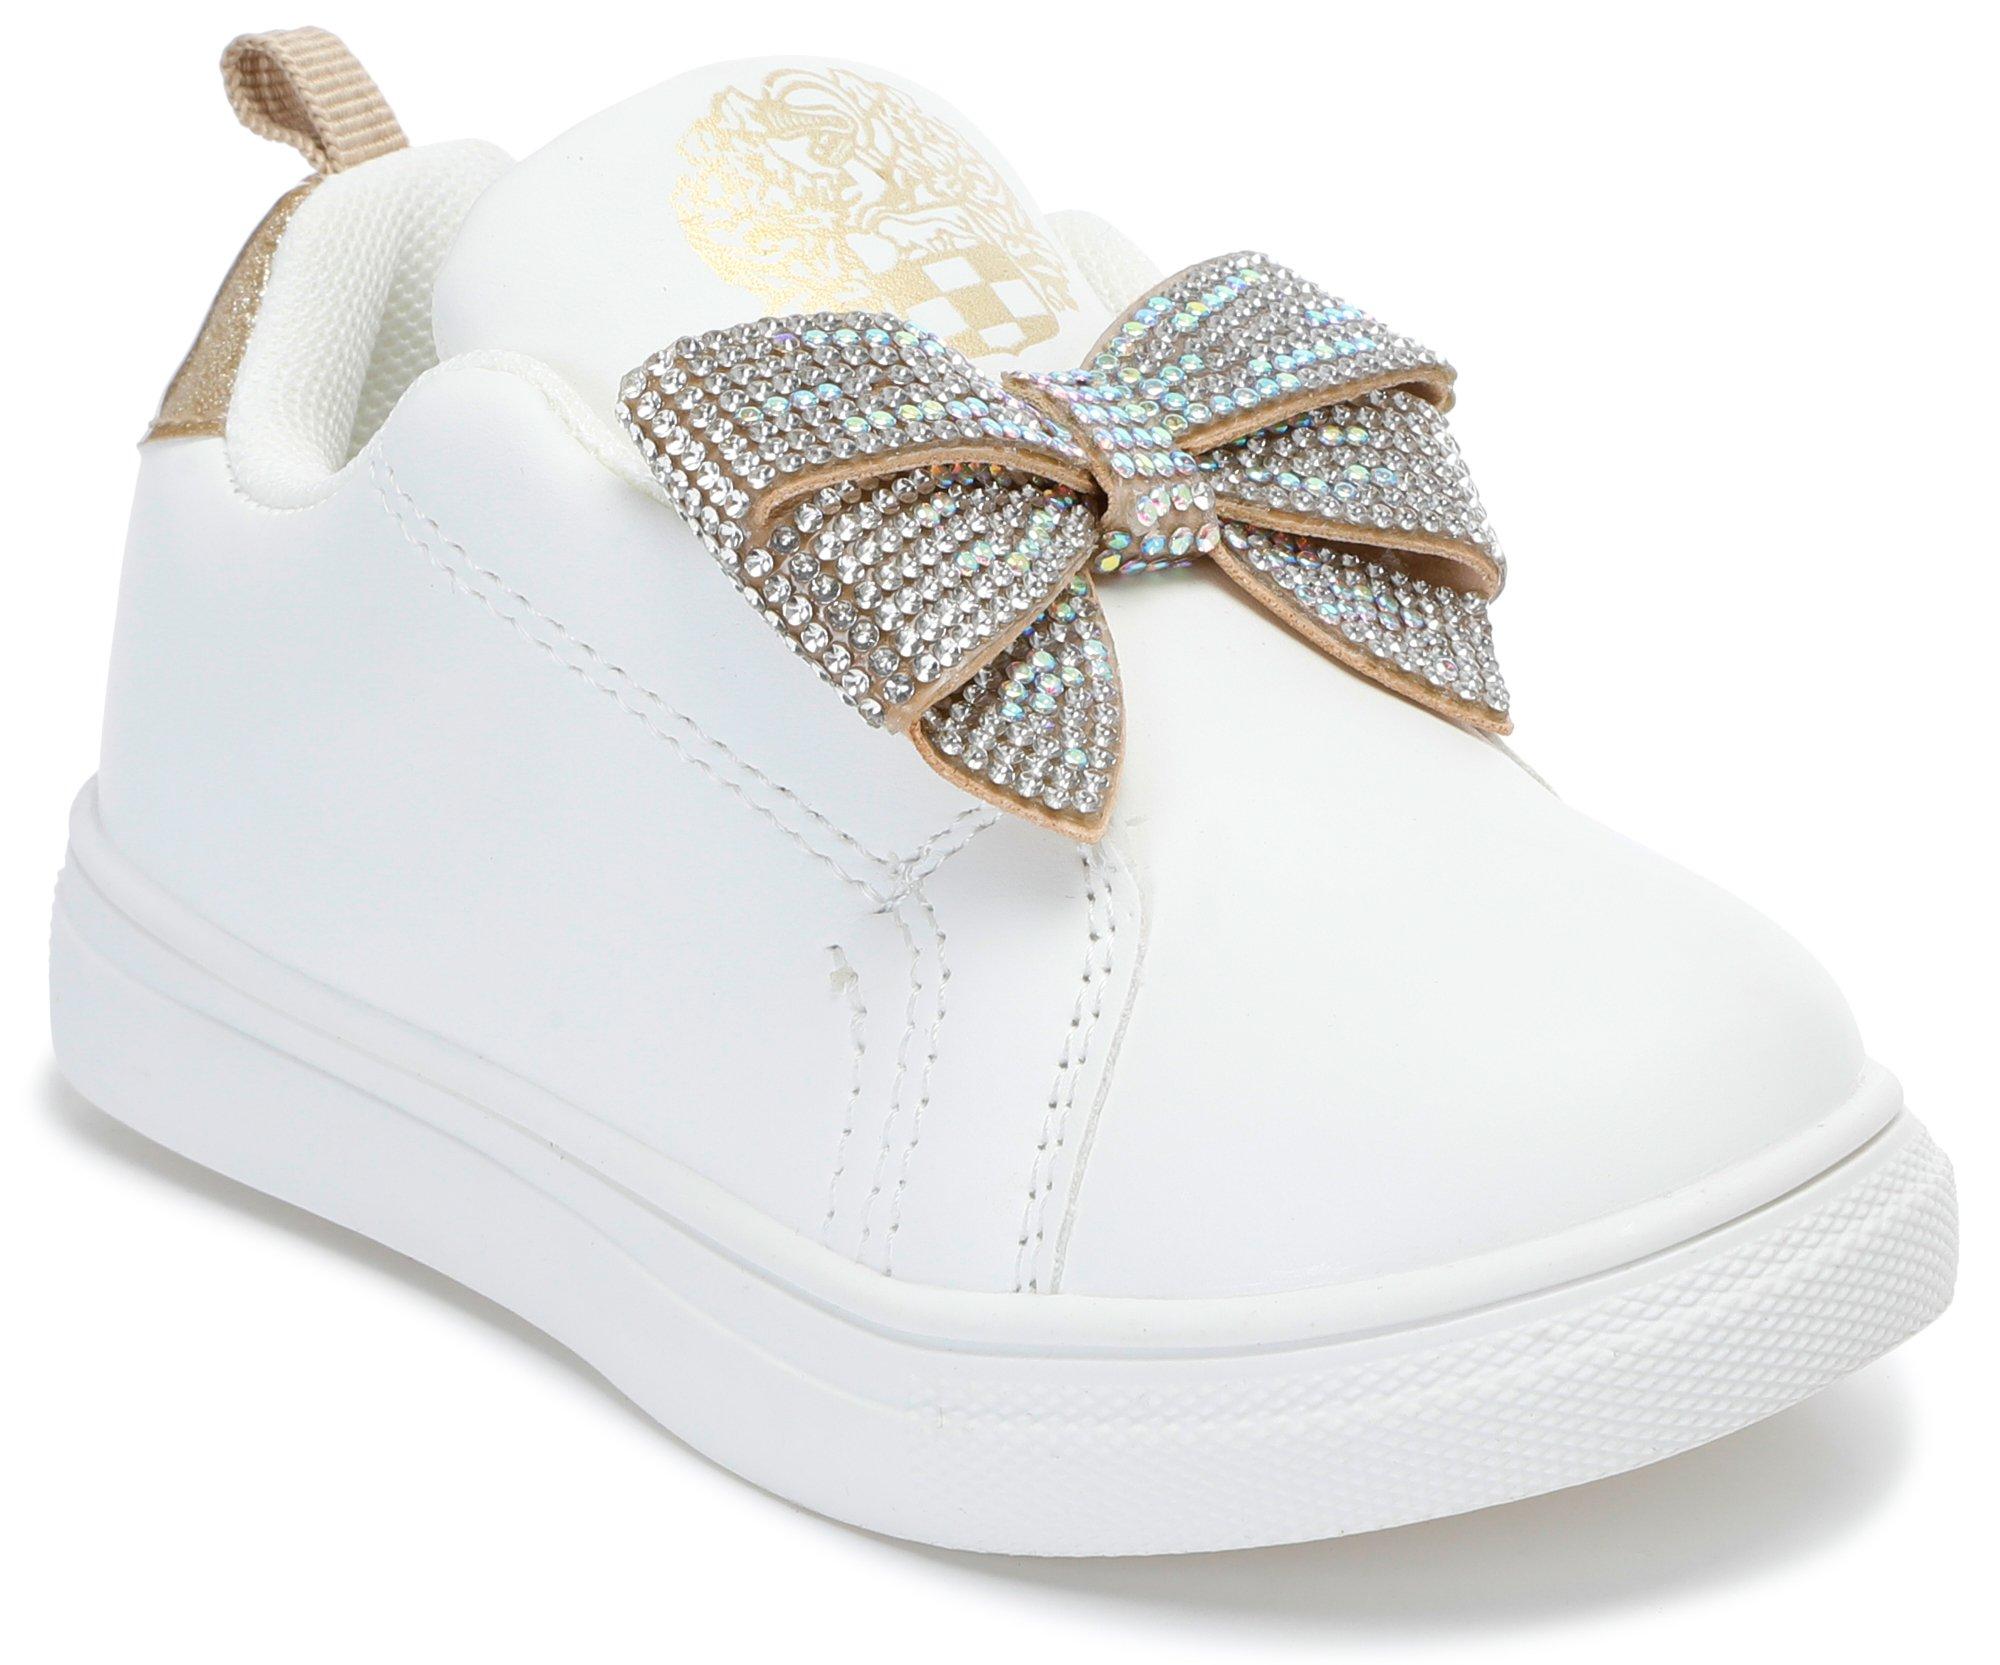 Toddler Girls Solid Sneakers